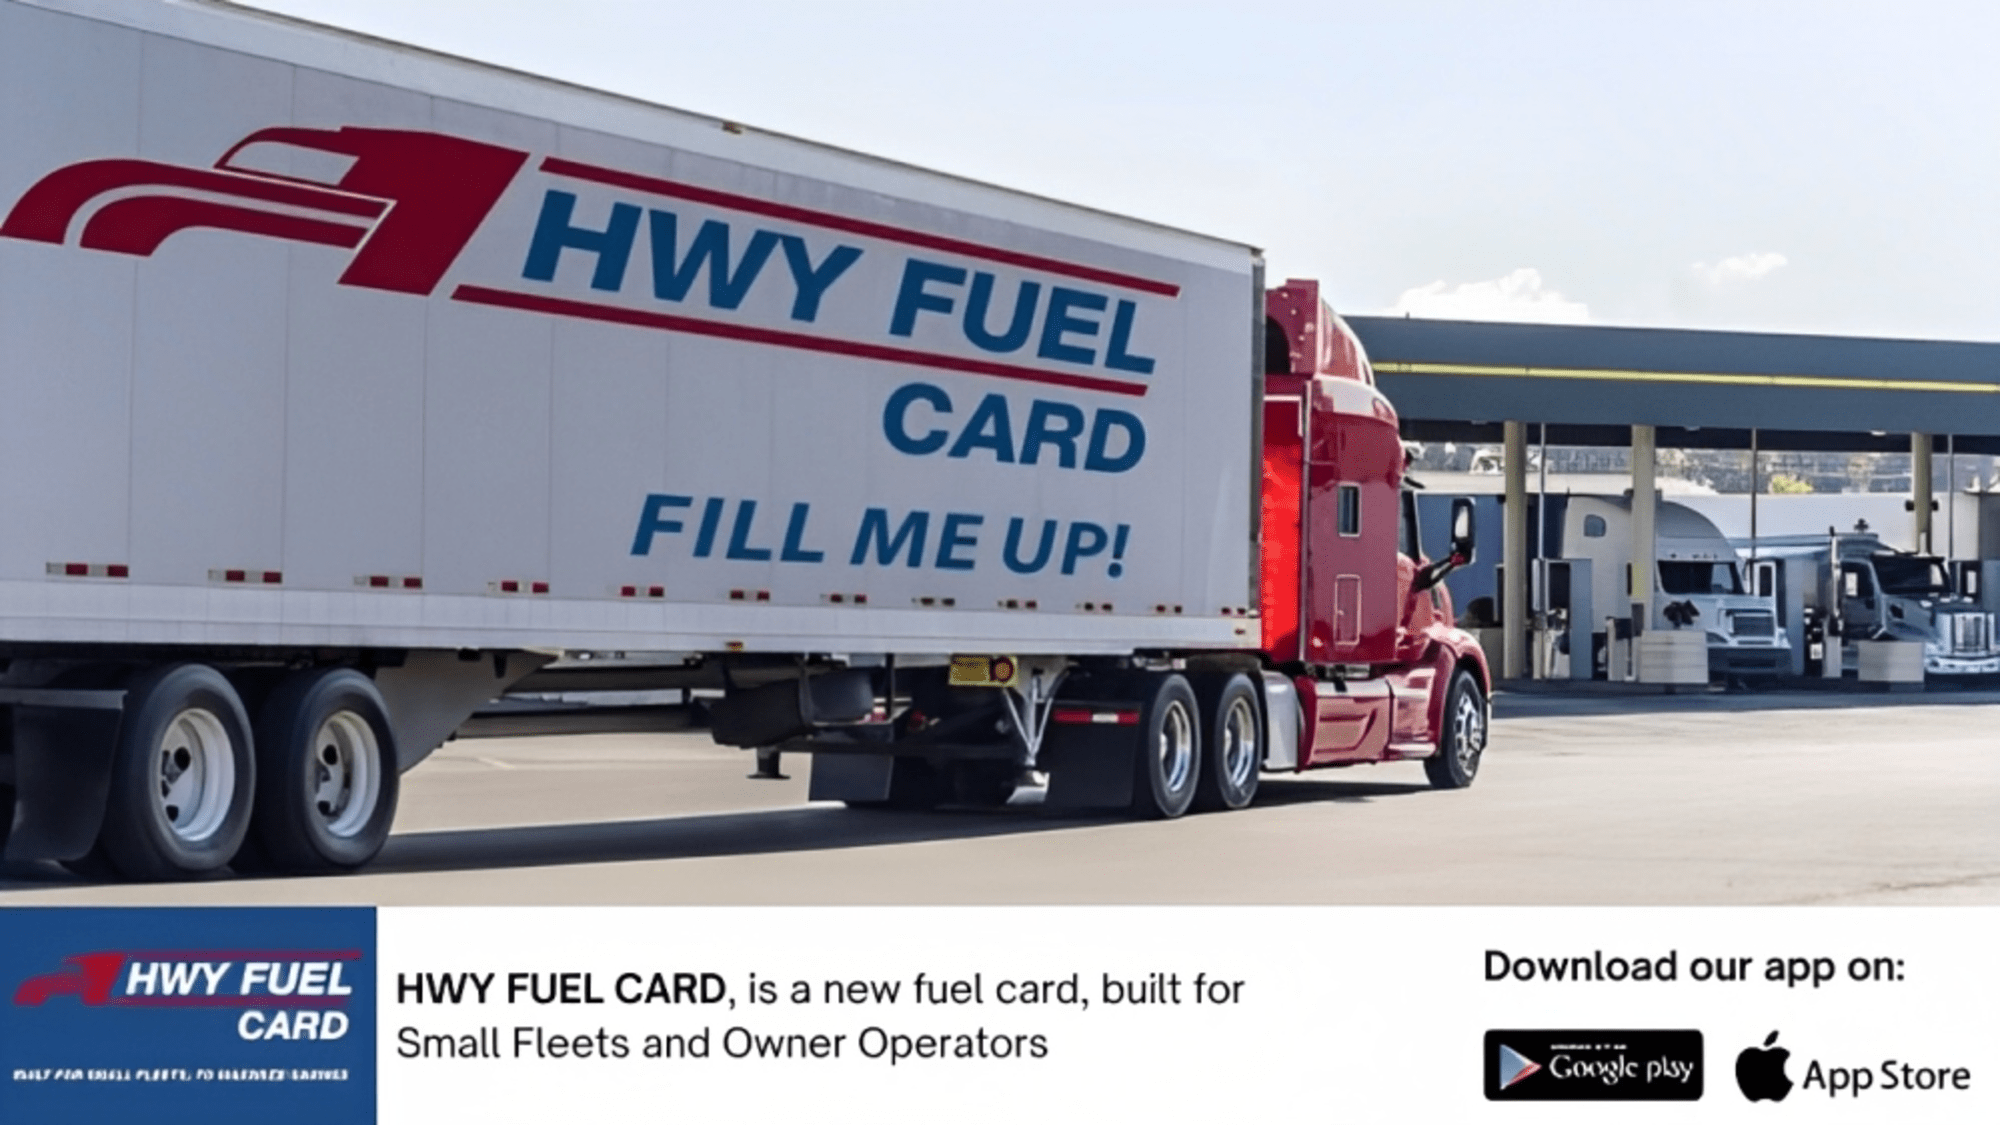 HWY Fuel Card - Fuel Discount Card For Small Fleets